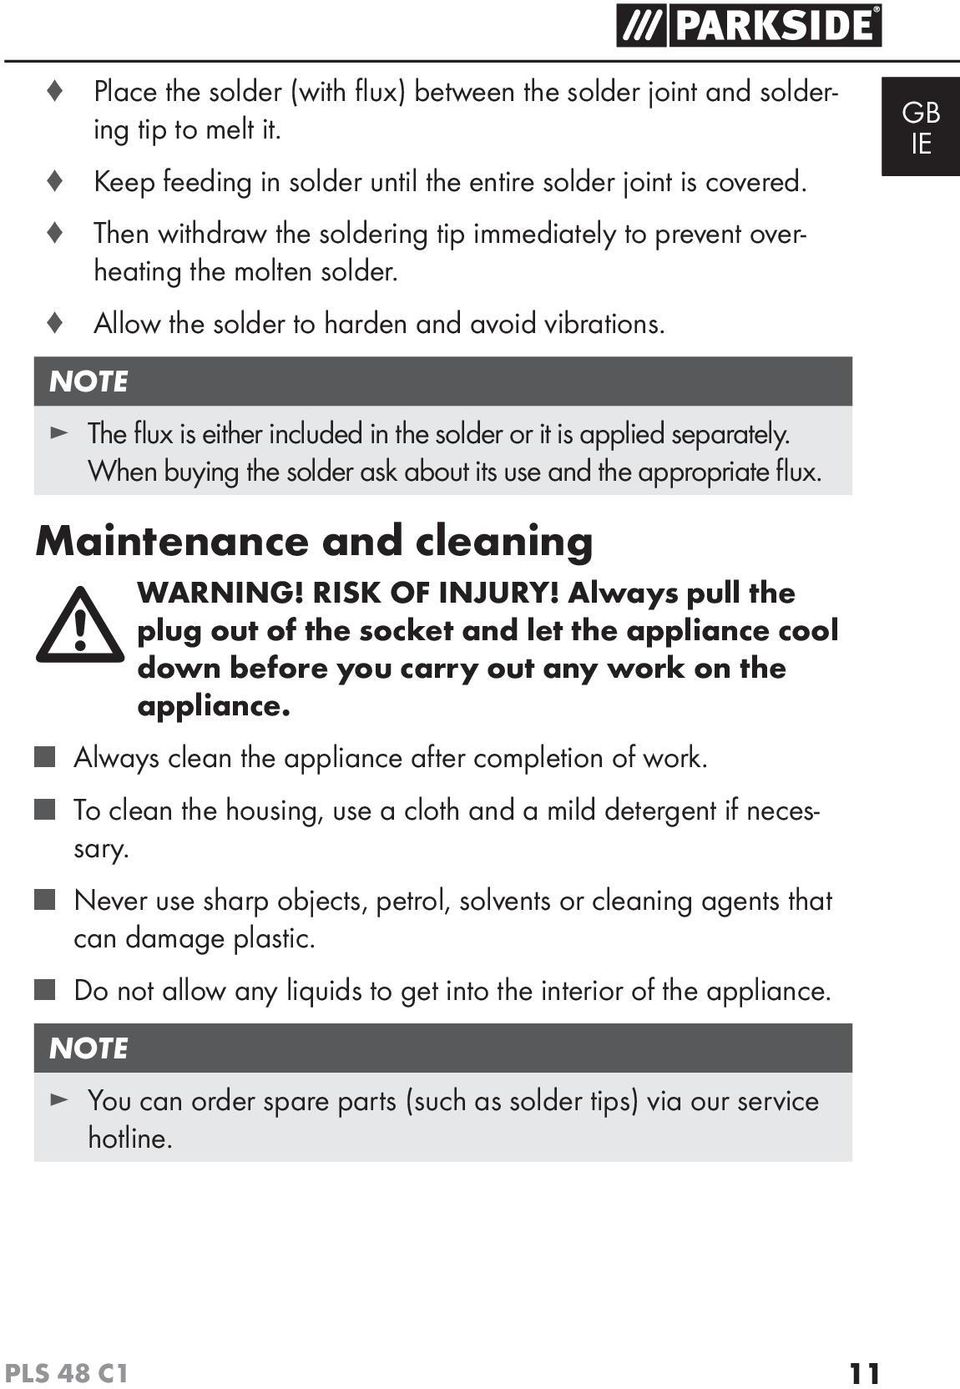 The flux is either included in the solder or it is applied separately. When buying the solder ask about its use and the appropriate flux. Maintenance and cleaning WARNING! RISK OF INJURY!